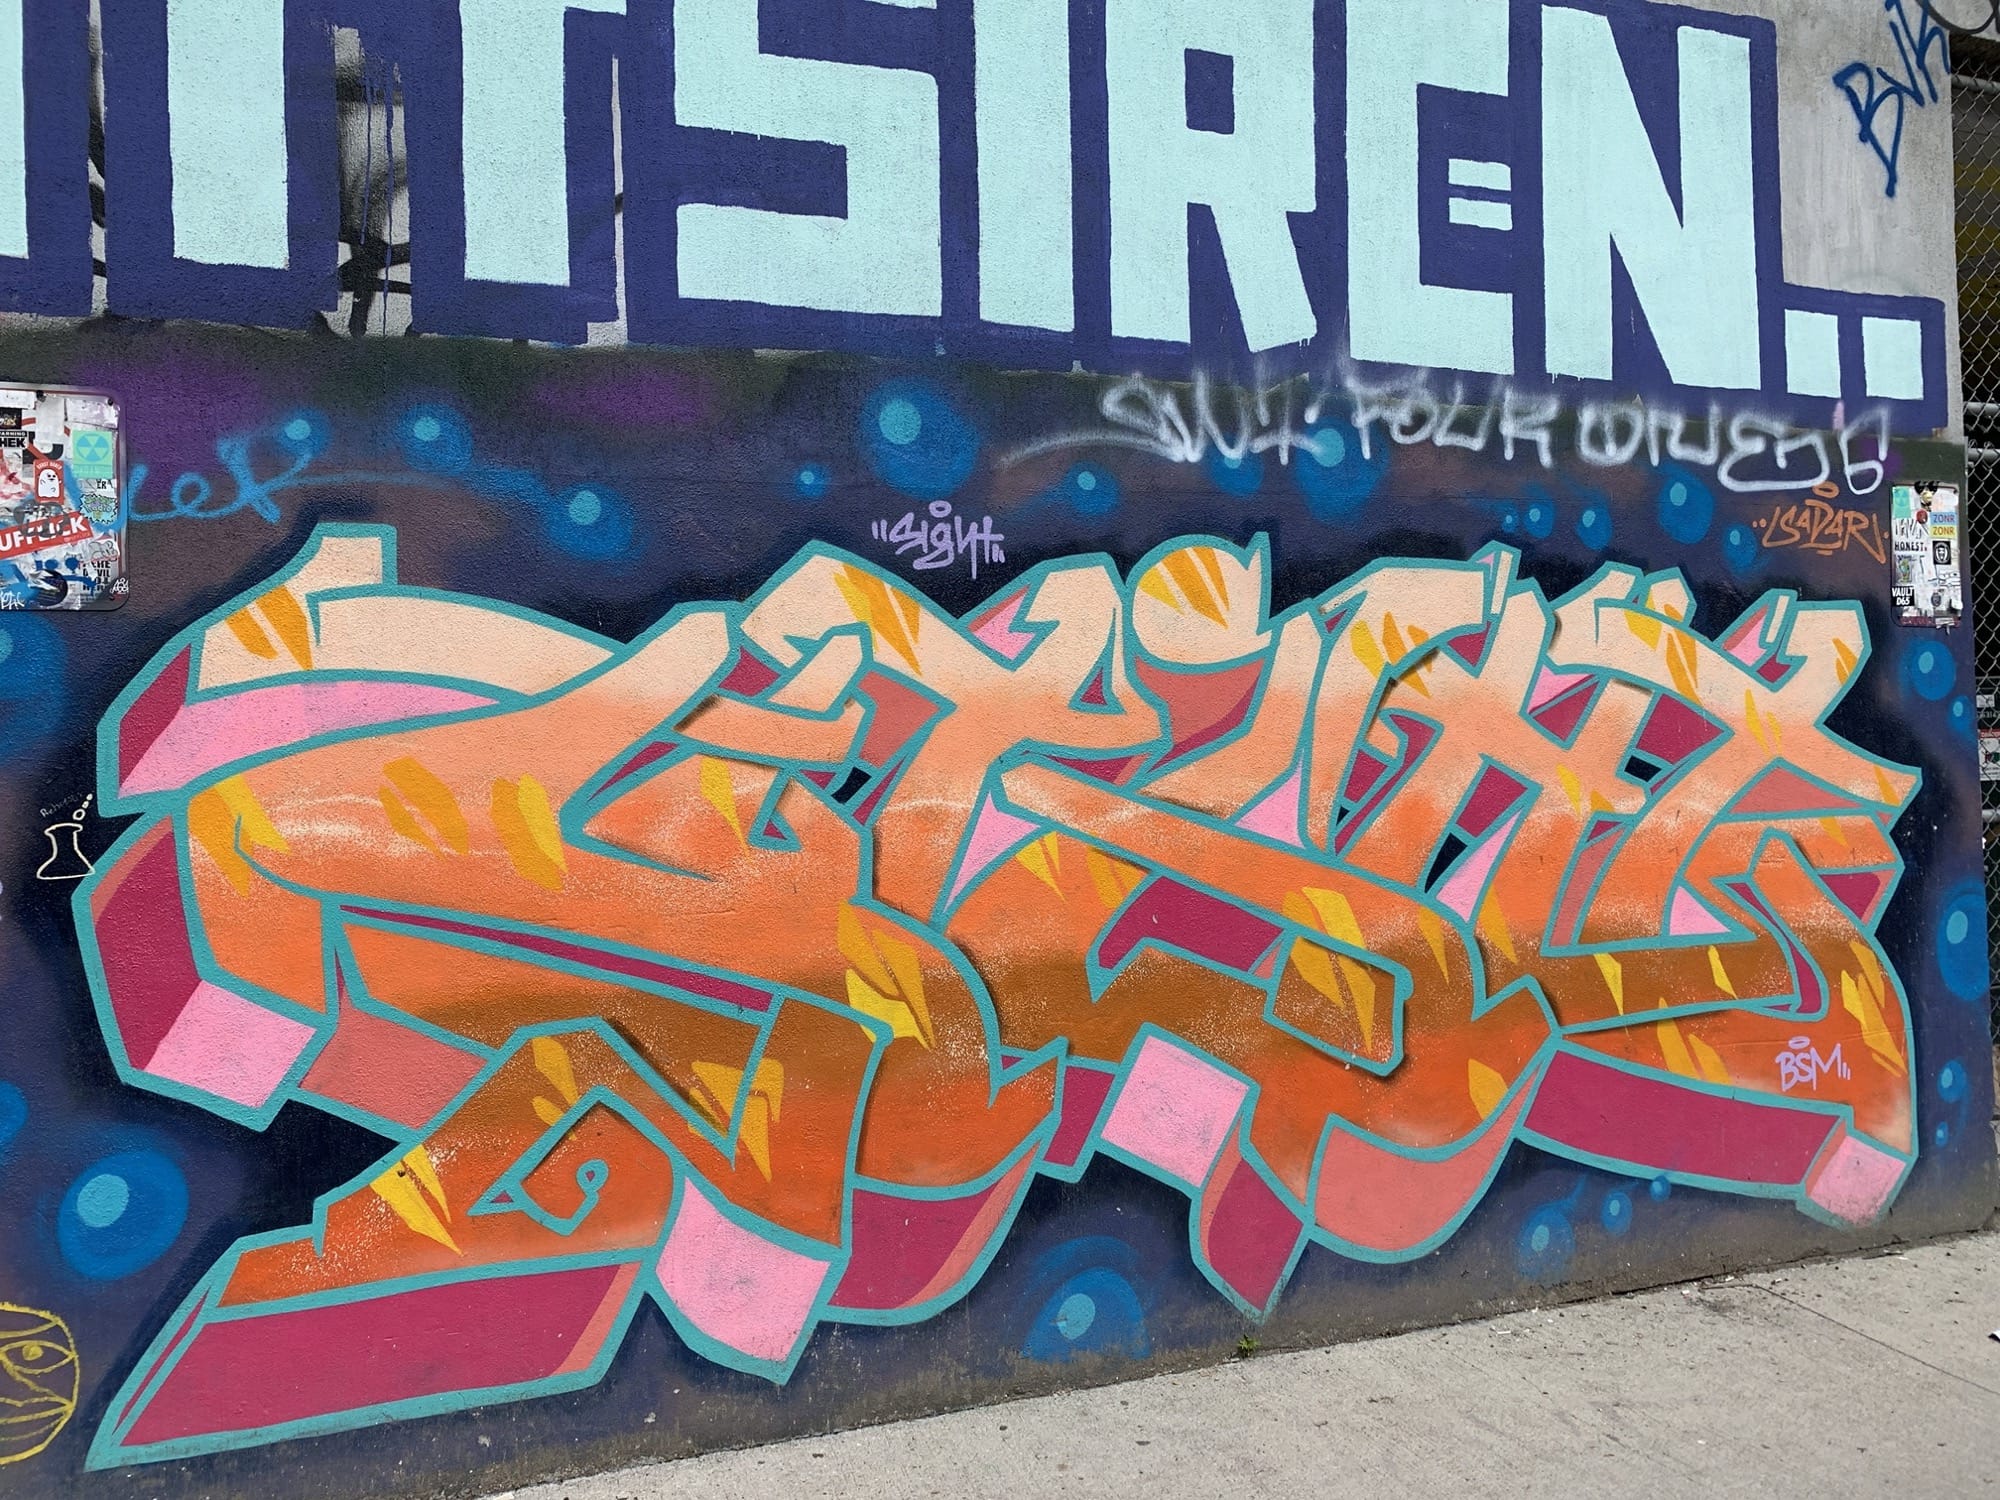 Graffiti 2577  captured by Rabot in Toronto Canada